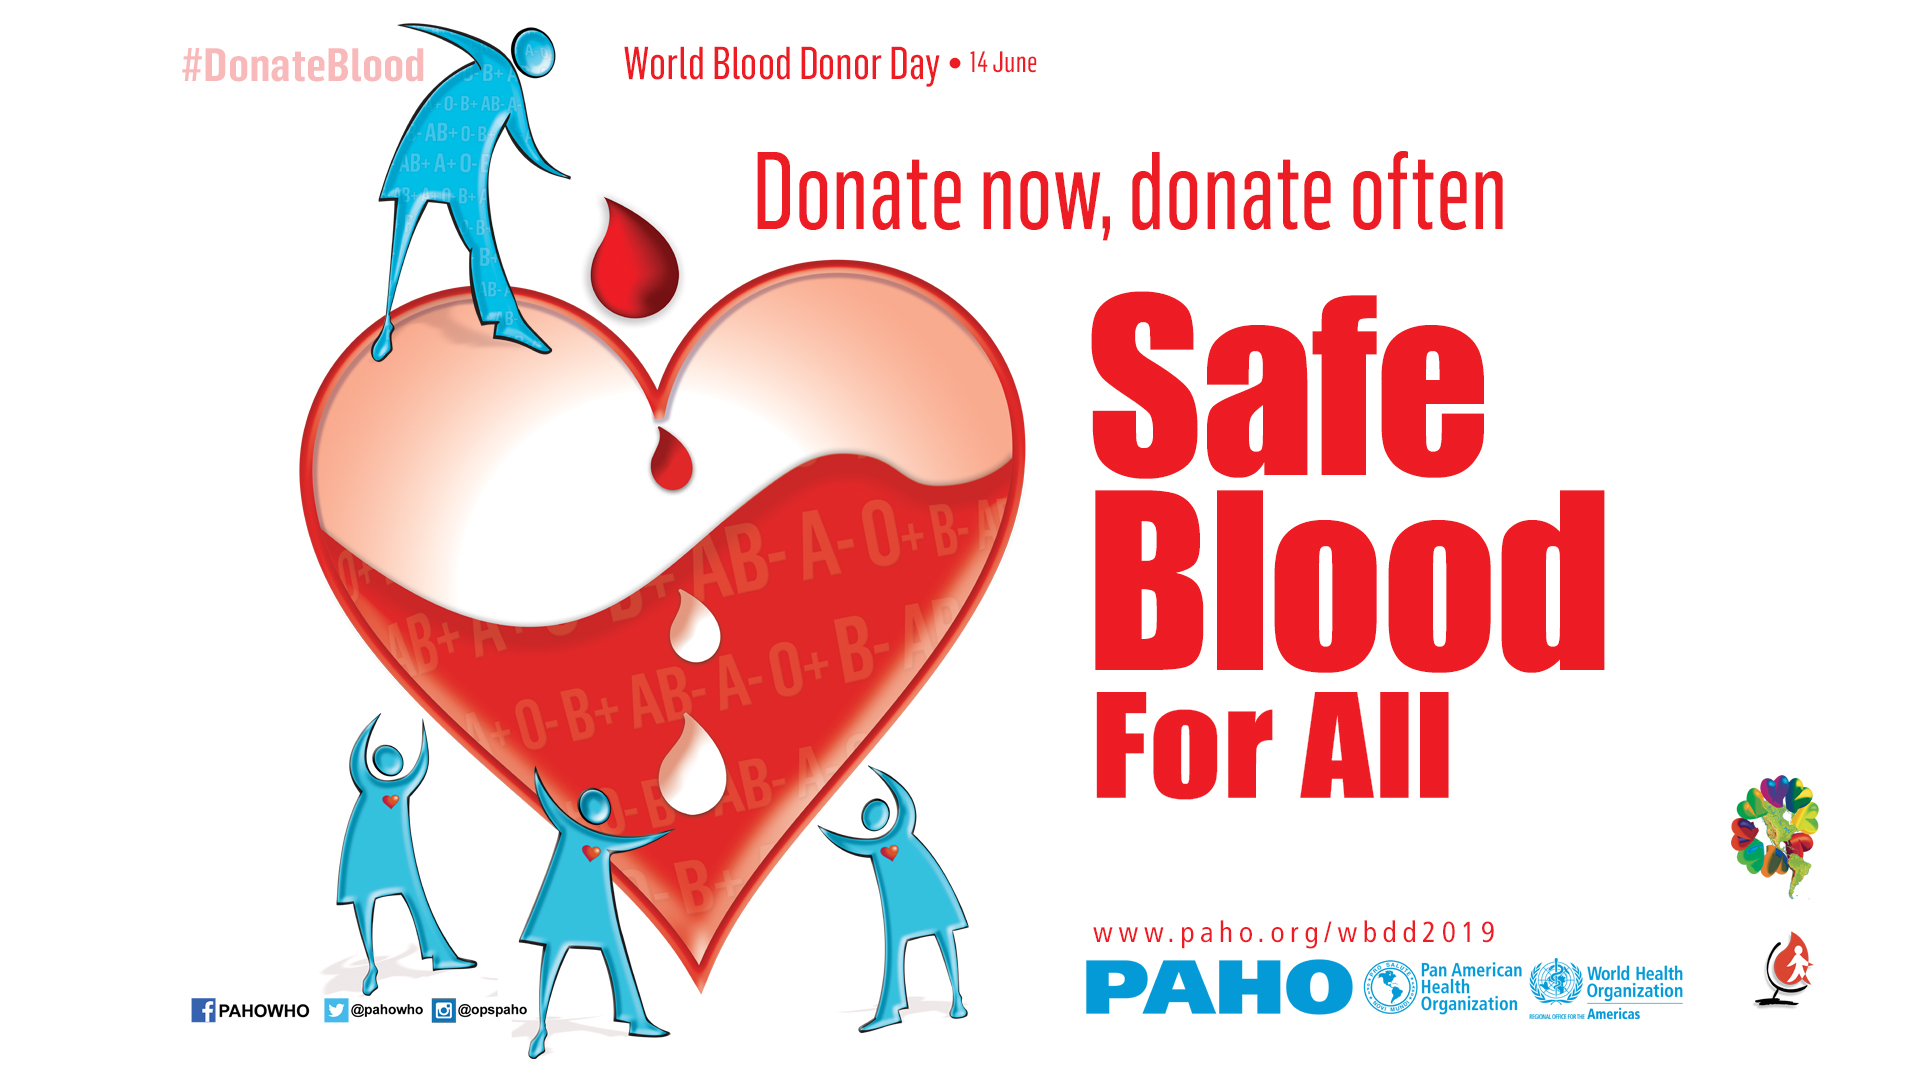 PAHO/WHO | Safe blood for all. 14 June 2019